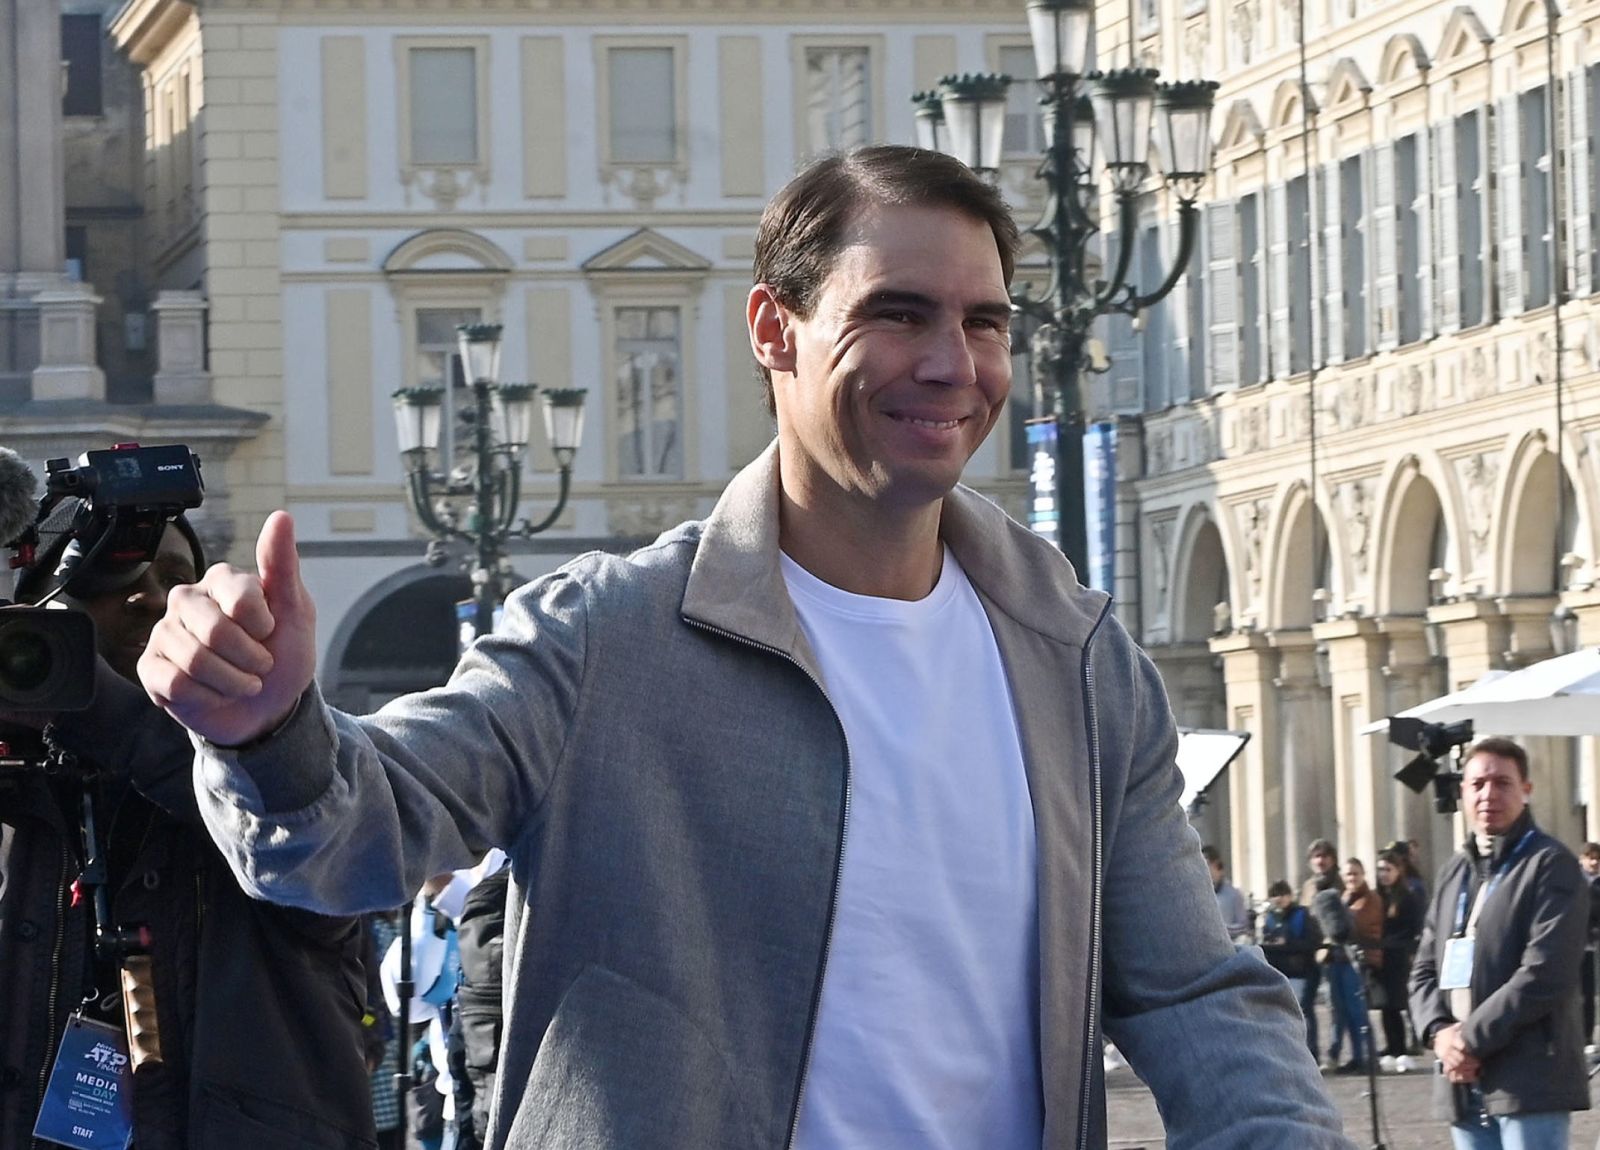 epa10299379 Spanish tennis player Rafael Nadal walks on the Blue Carpet for the Nitto ATP Finals 2022 in Turin, Italy, 11 November 2022. The Nitto ATP Finals 2022 tournament will be held from 13 to 20 November 2022 in Turin.  EPA/ALESSANDRO DI MARCO